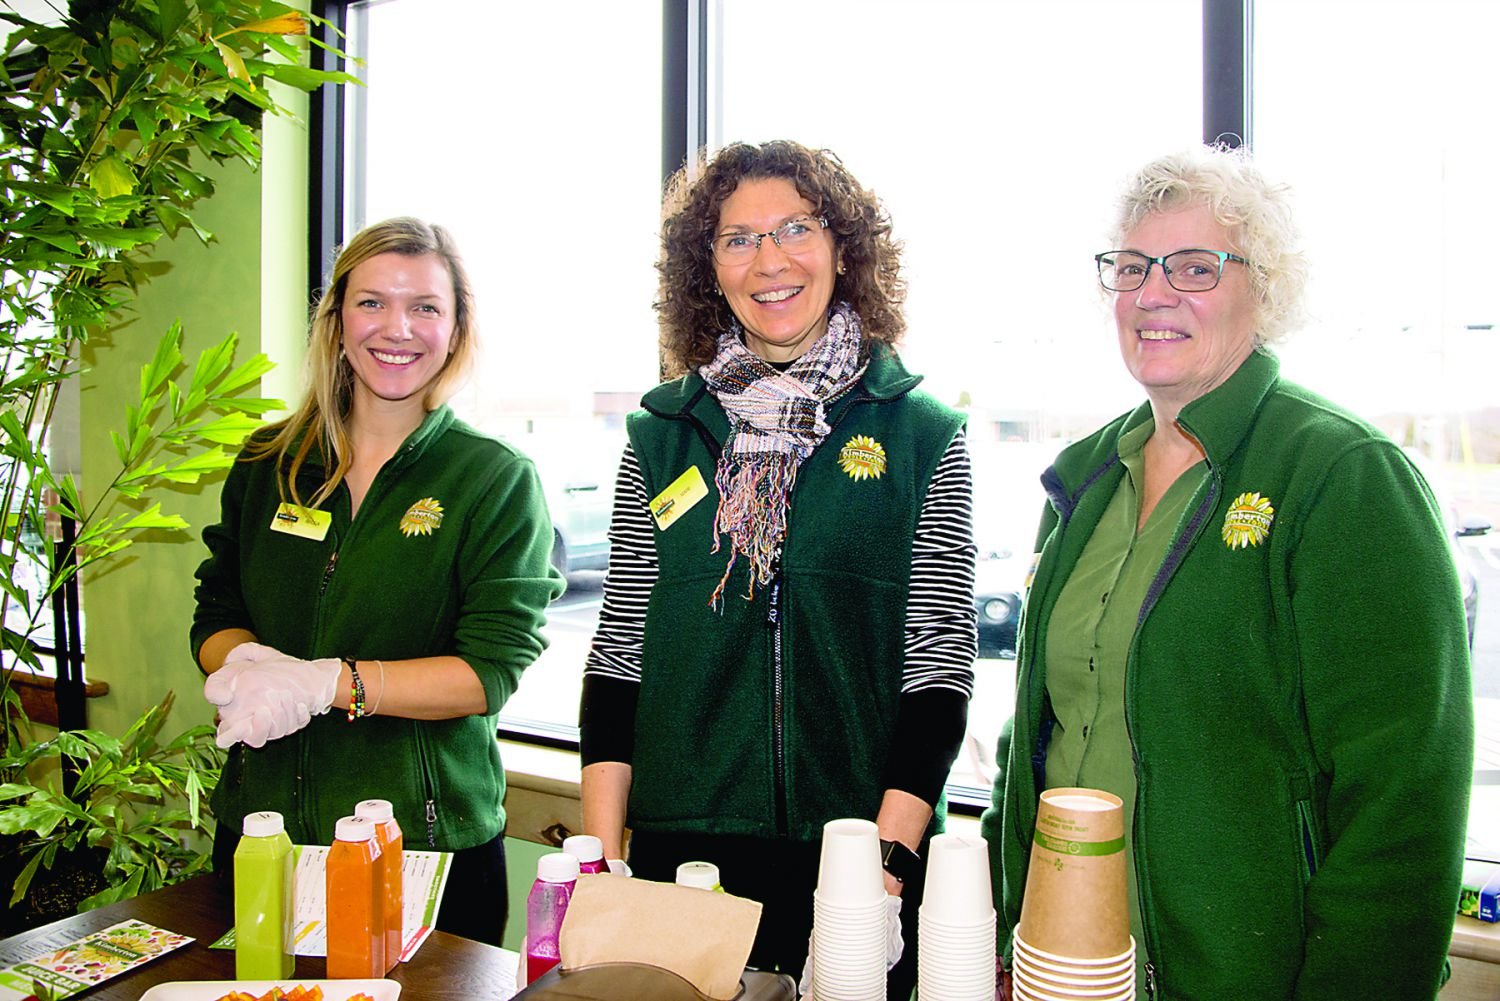 The managing team at Kimberton Whole Foods: Becca Settle, director of marketing, Mari Stambaugh, administrative assistant, and store manager Gerri Matey. Photograph by Chiara Chandoha.